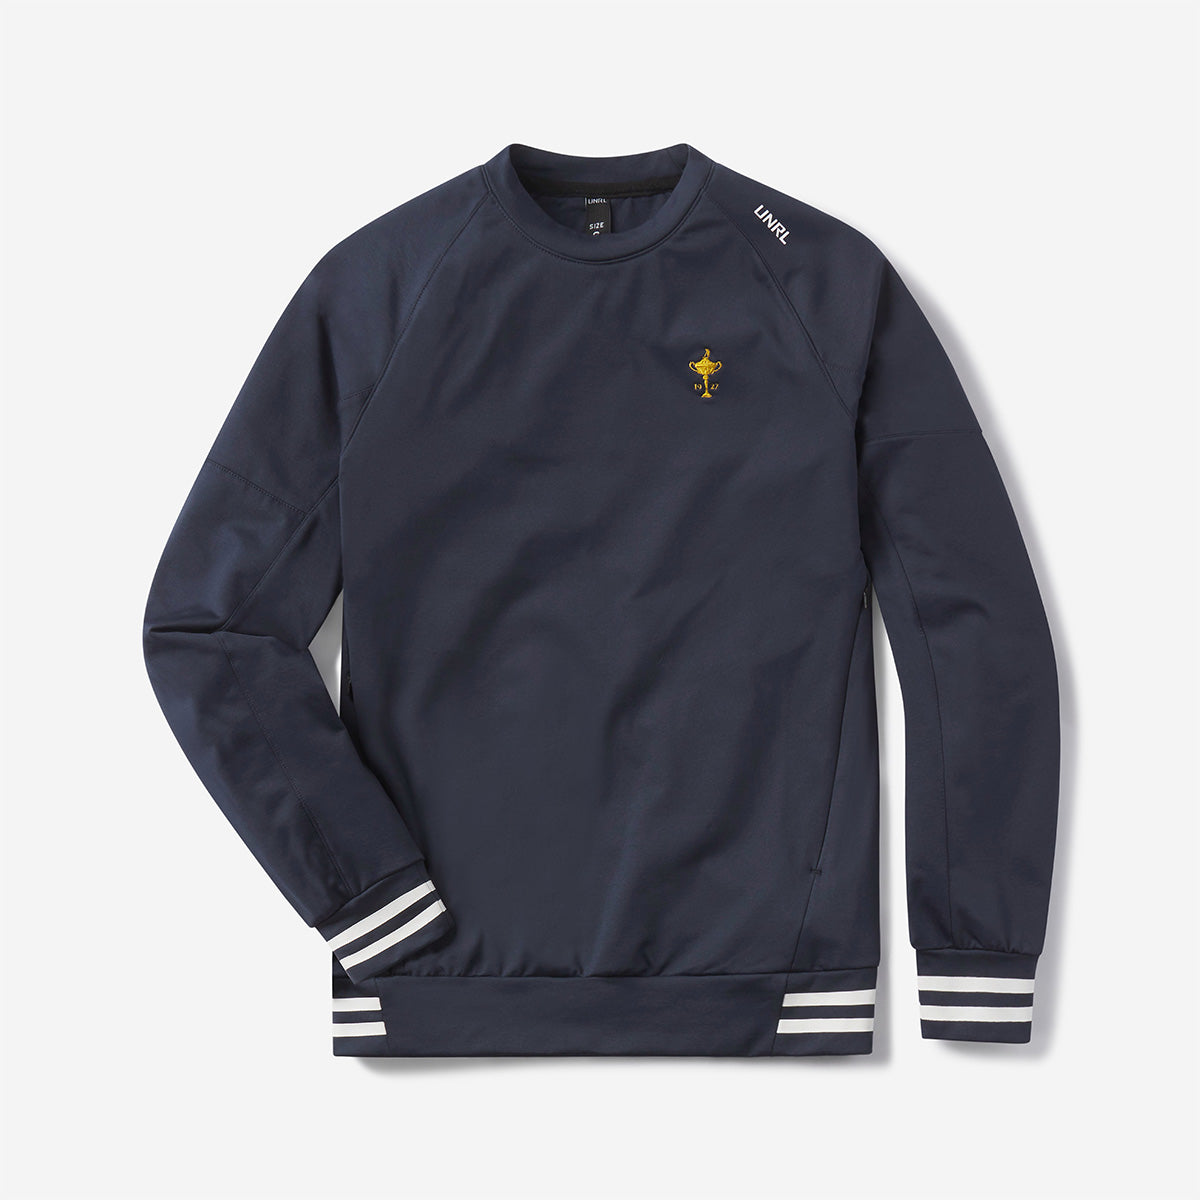 UNRL x Barstool Ryder Cup Trophy Crossover Crewneck-Crewnecks-Fore Play-Navy-S-Barstool Sports